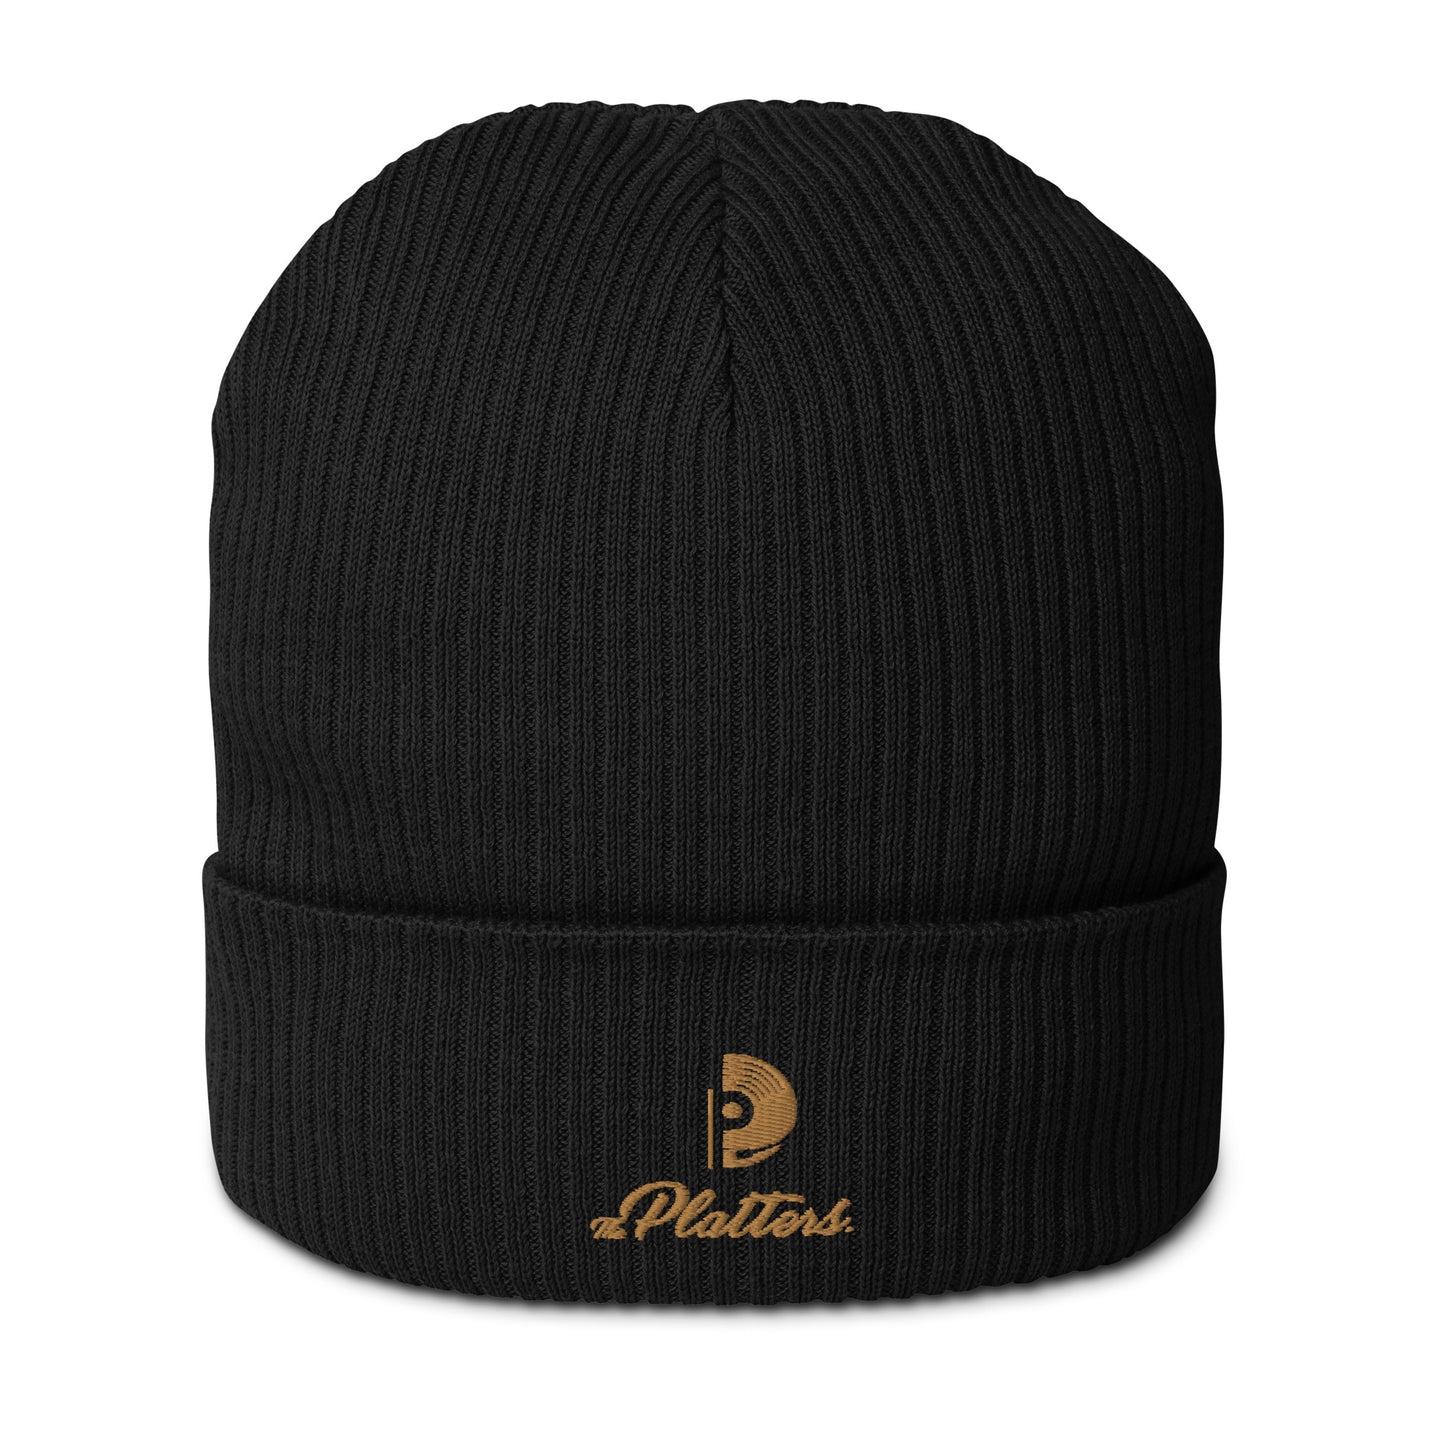 The Platters®️ Organic Ribbed Beanie